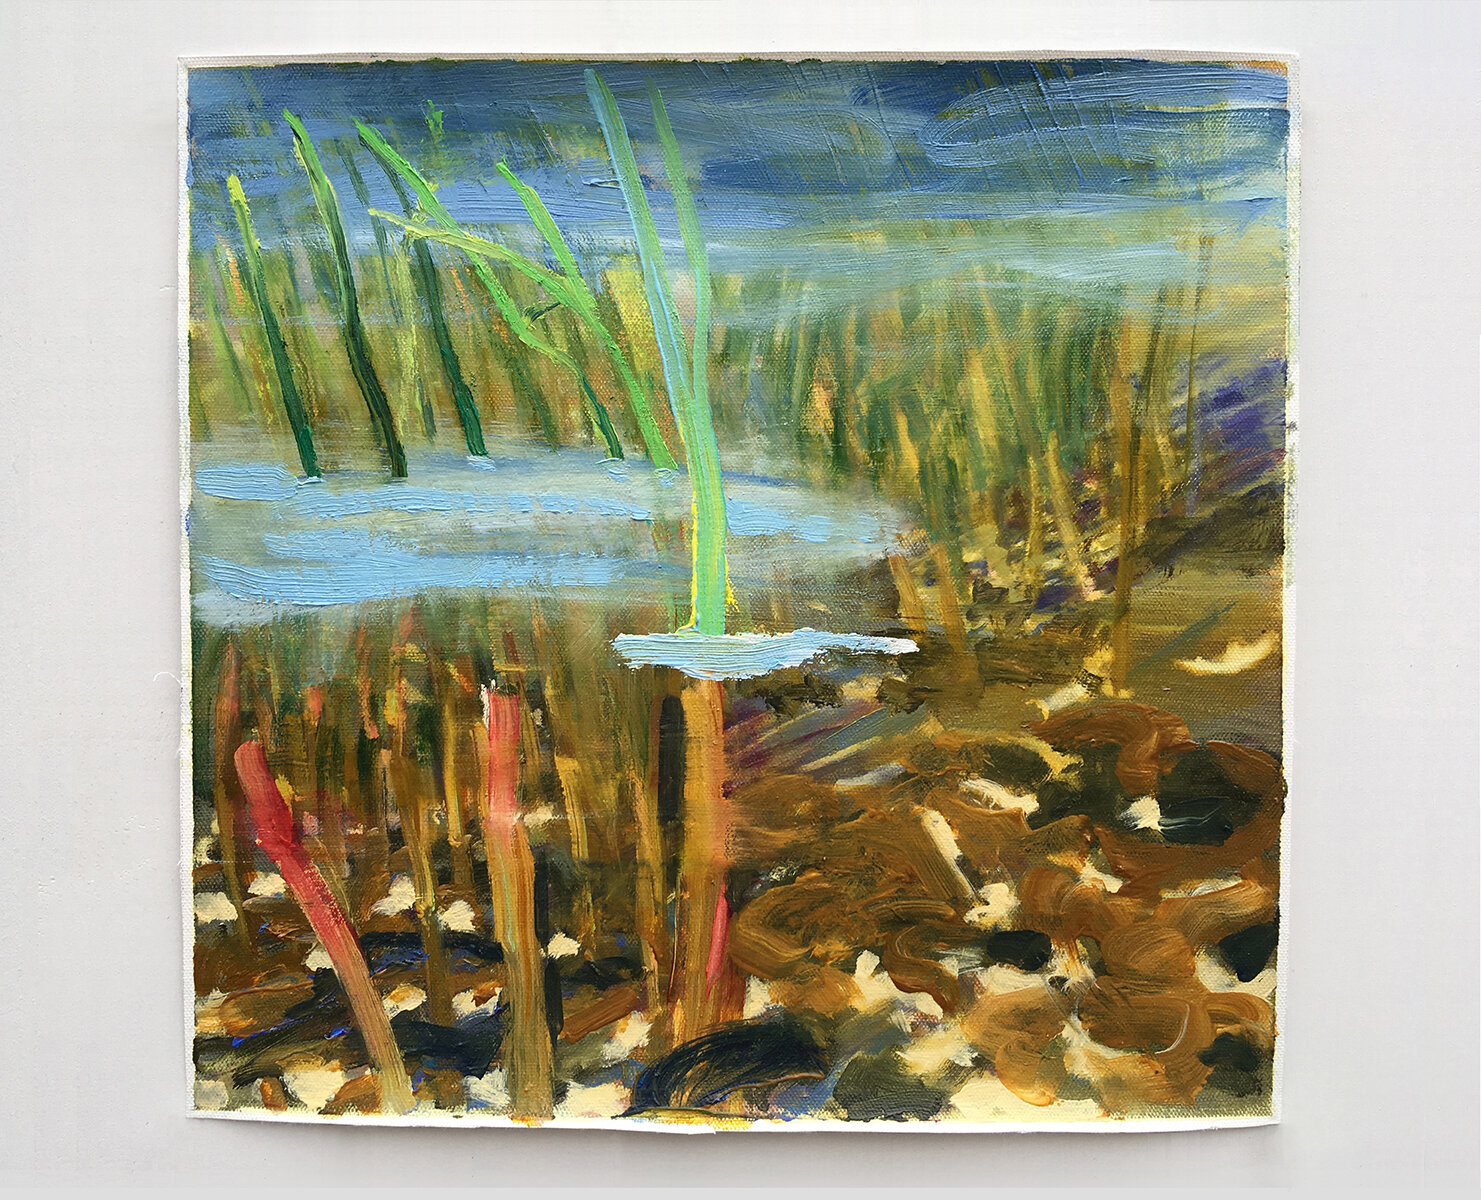   Study for Pond on Wheels XI    Oil on canvas  13 ½ x 15 inches 34 x 38 cm 2019 